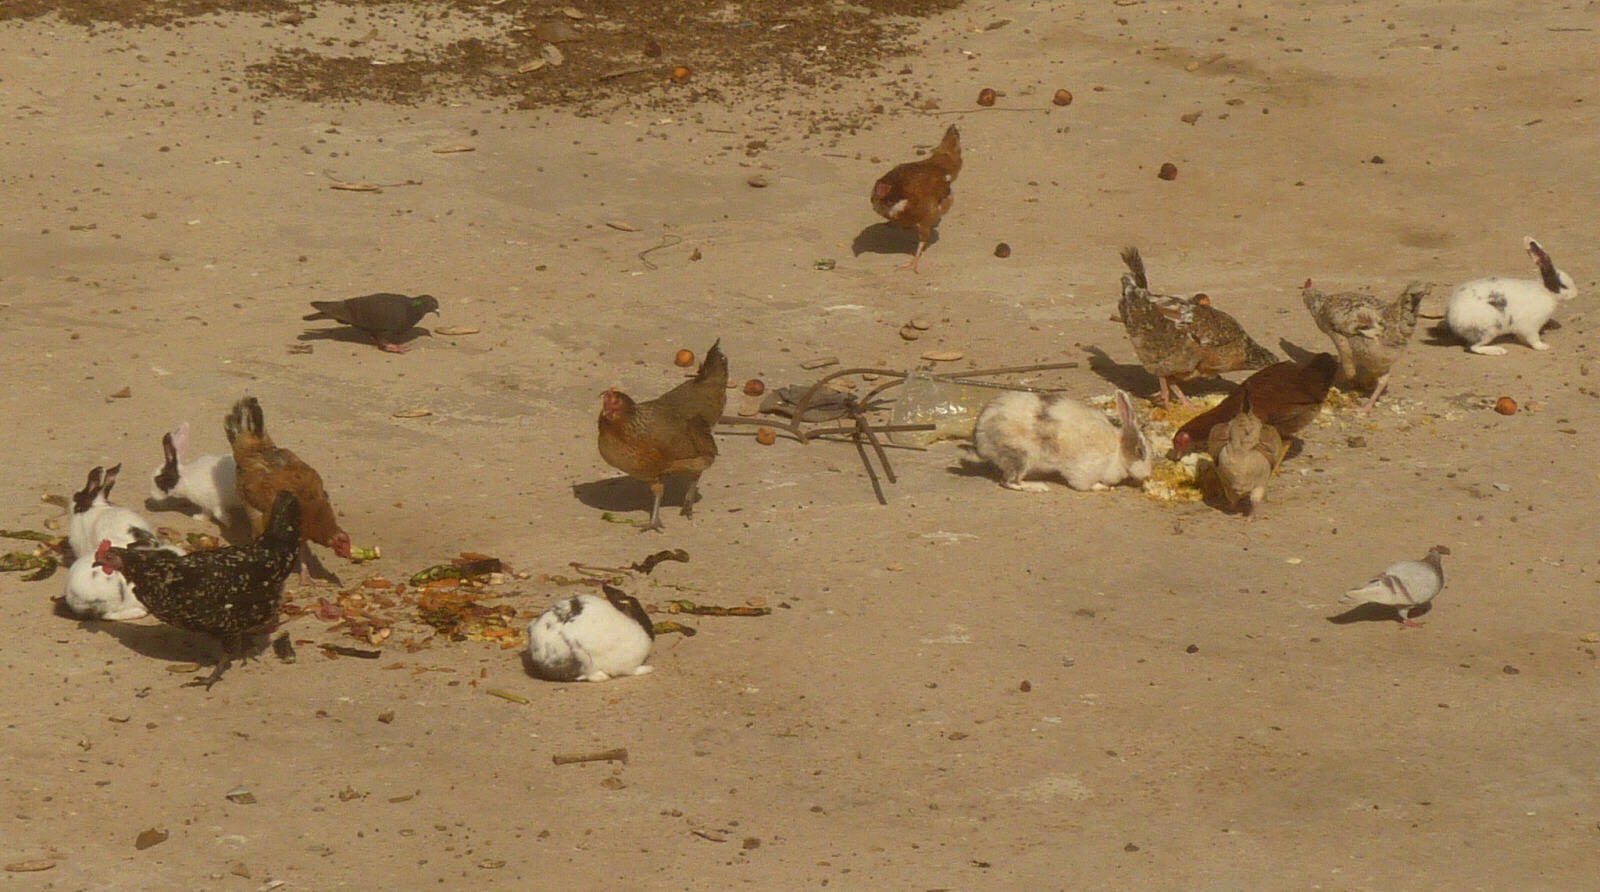 Chickens and rabbits on a rooftop in Laayoune, Western Sahara